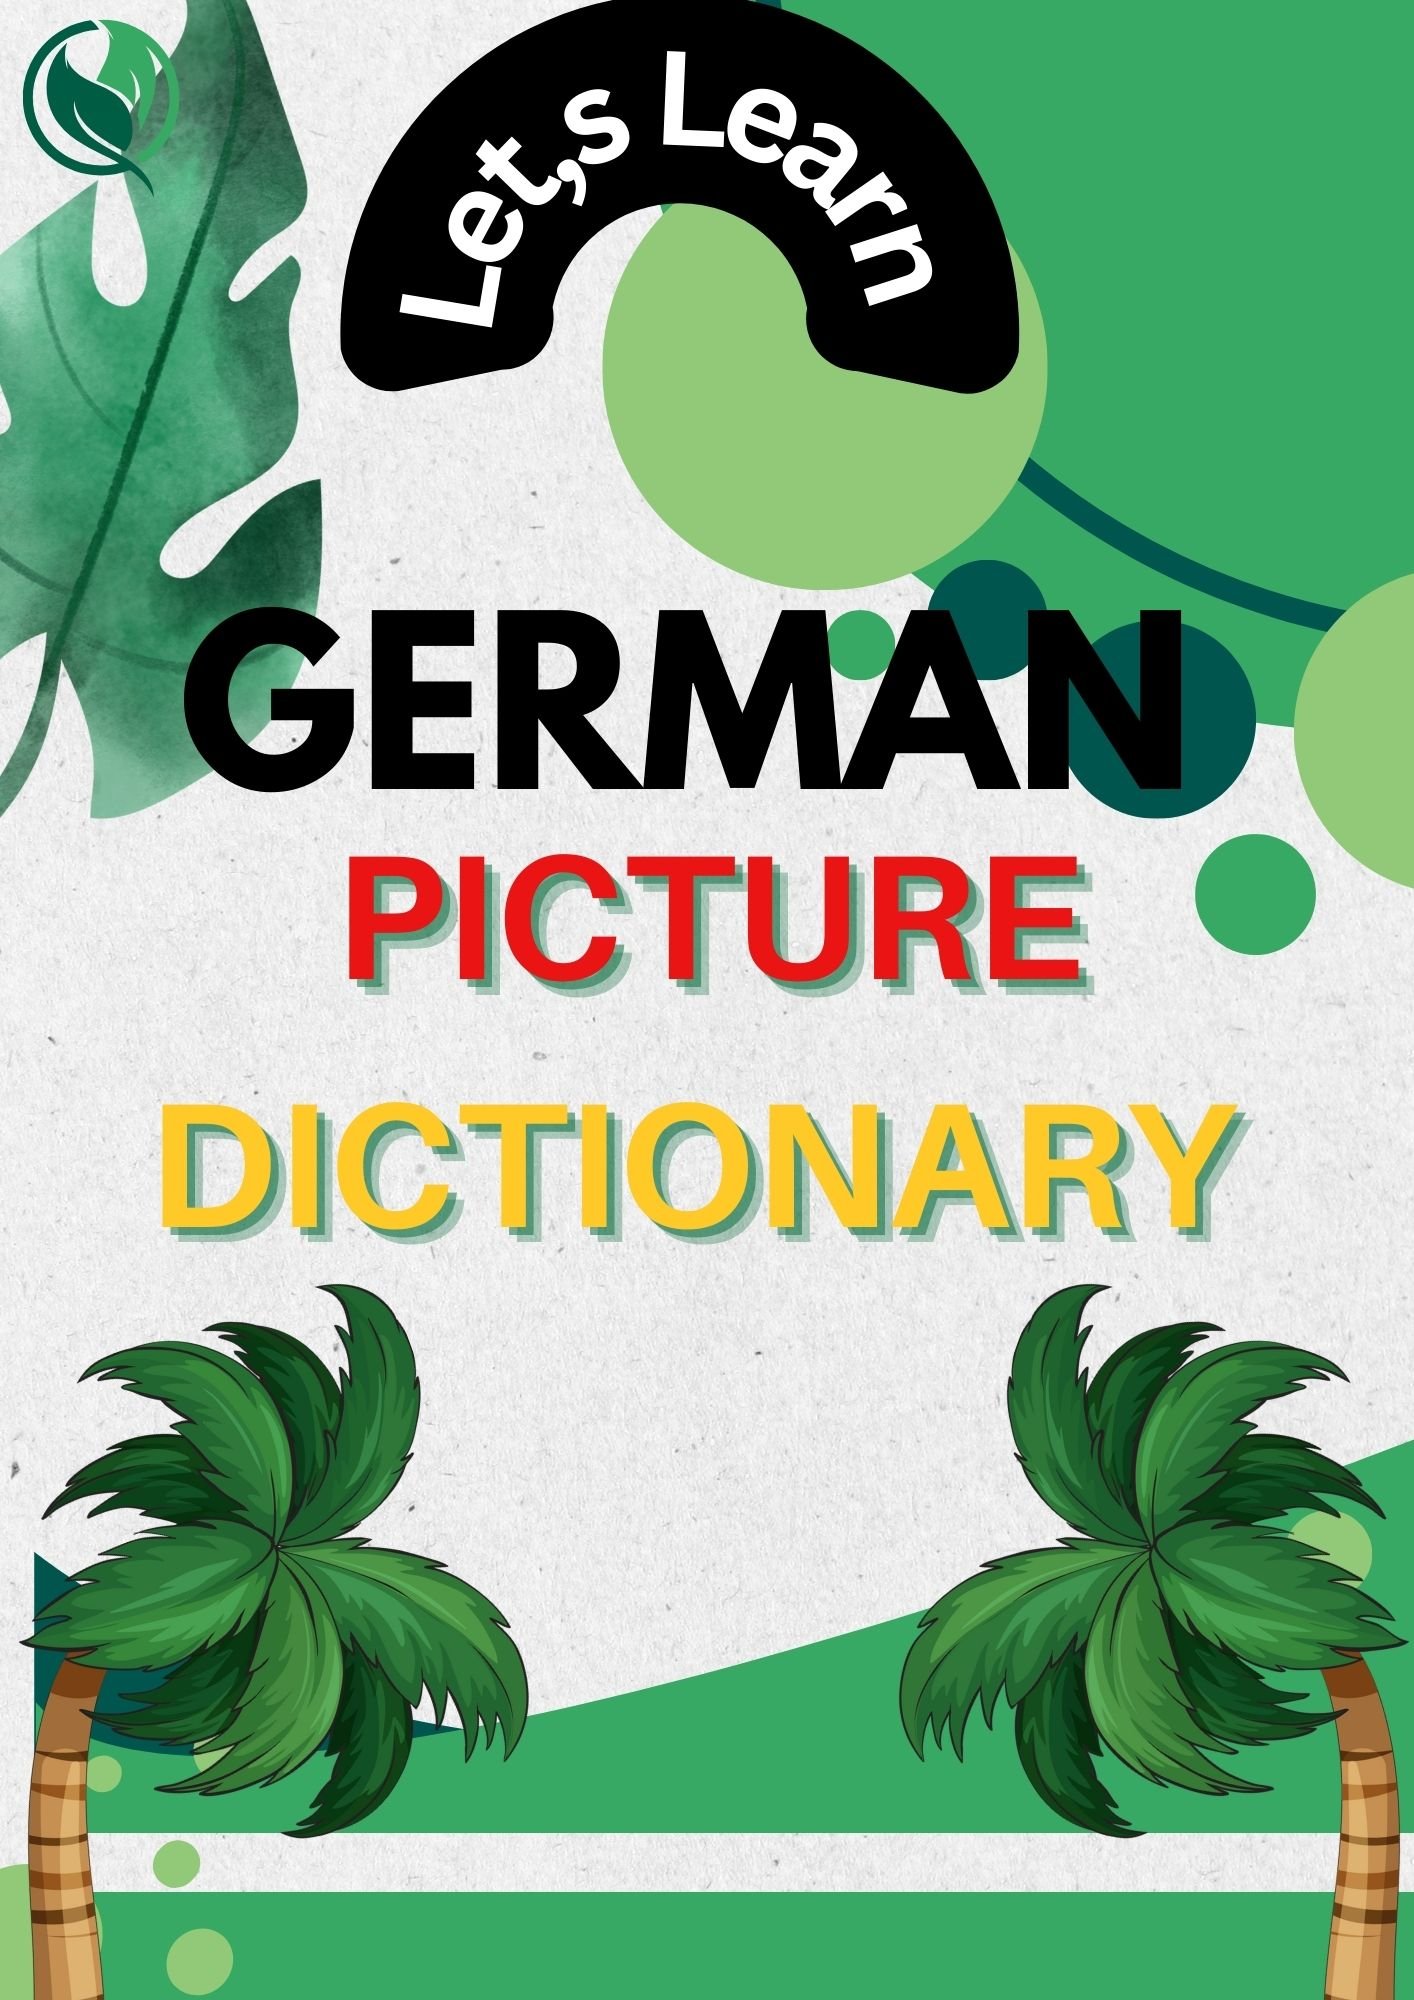 Rich Results on Google's SERP when searching for ''German Picture Dictionary''